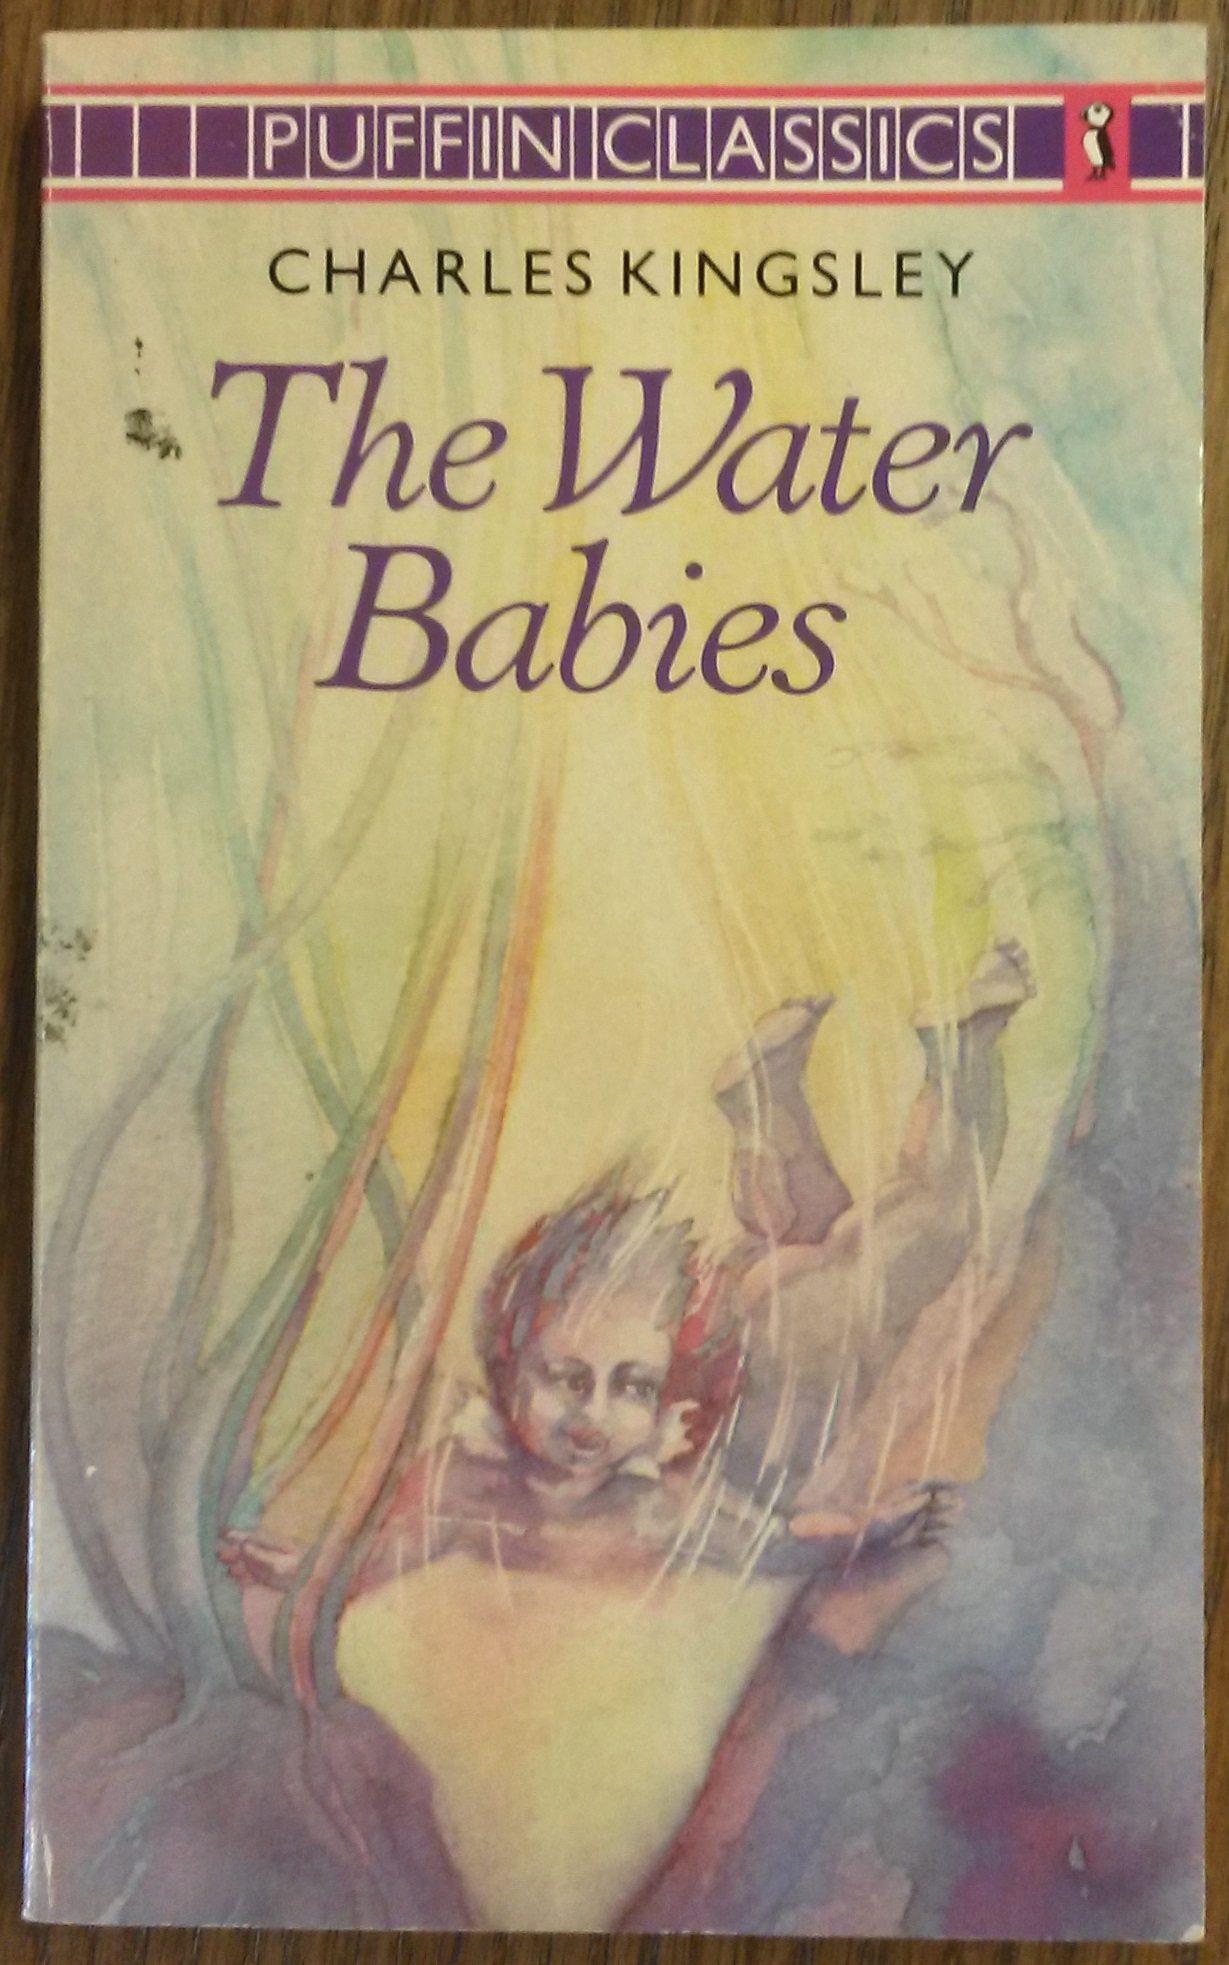 Cover image of water baby swimming amidst seaweed